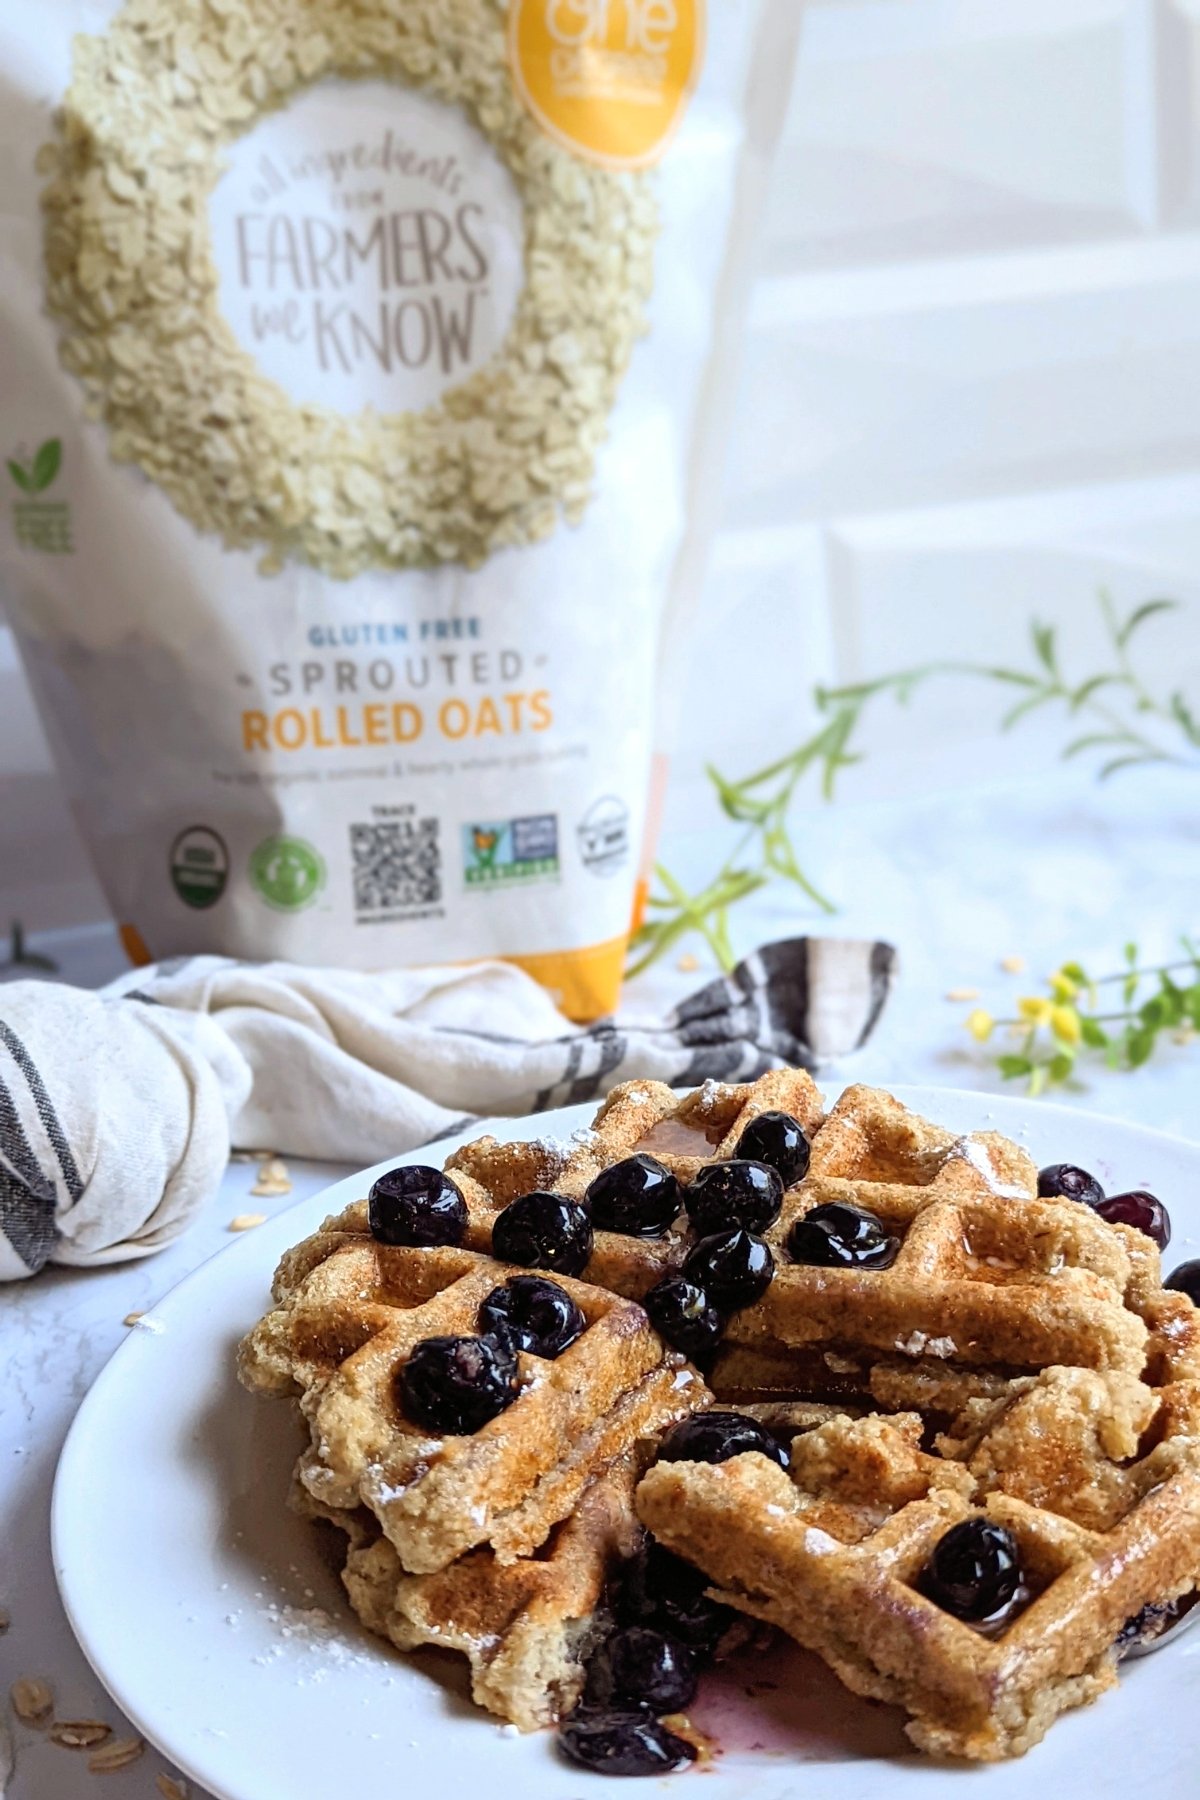 one degree organics sprouted rolled oats recipes make oat flour for waffles and pancakes easy breakfast ideas with oats